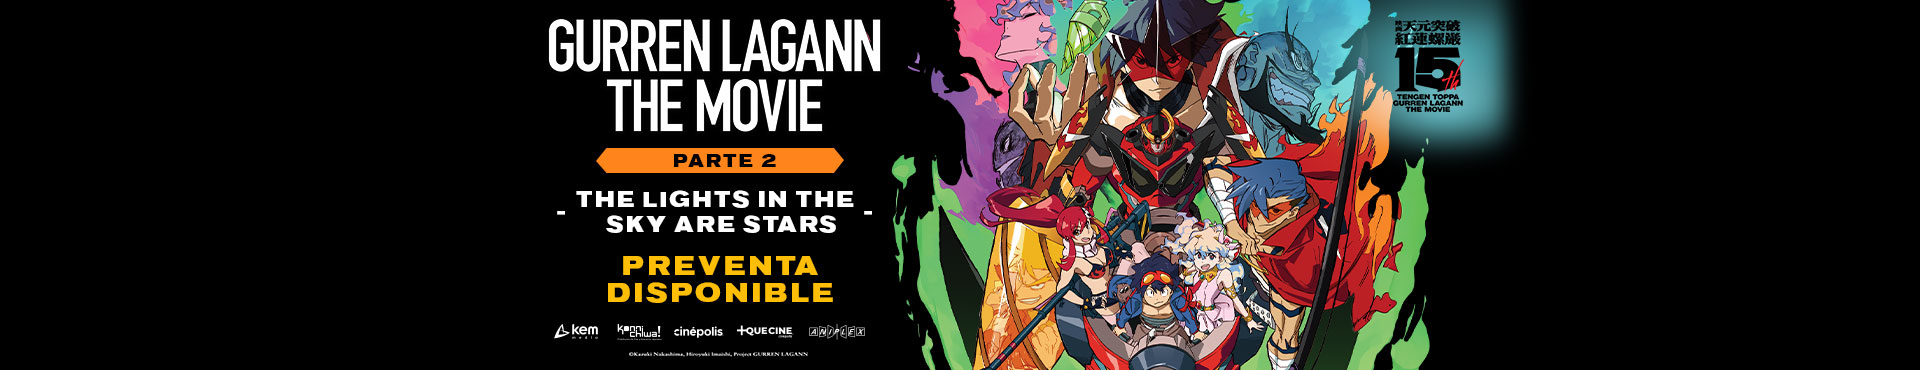 GURREN LAGANN THE MOVIE: THE LIGHTS IN THE SKY ARE STARS